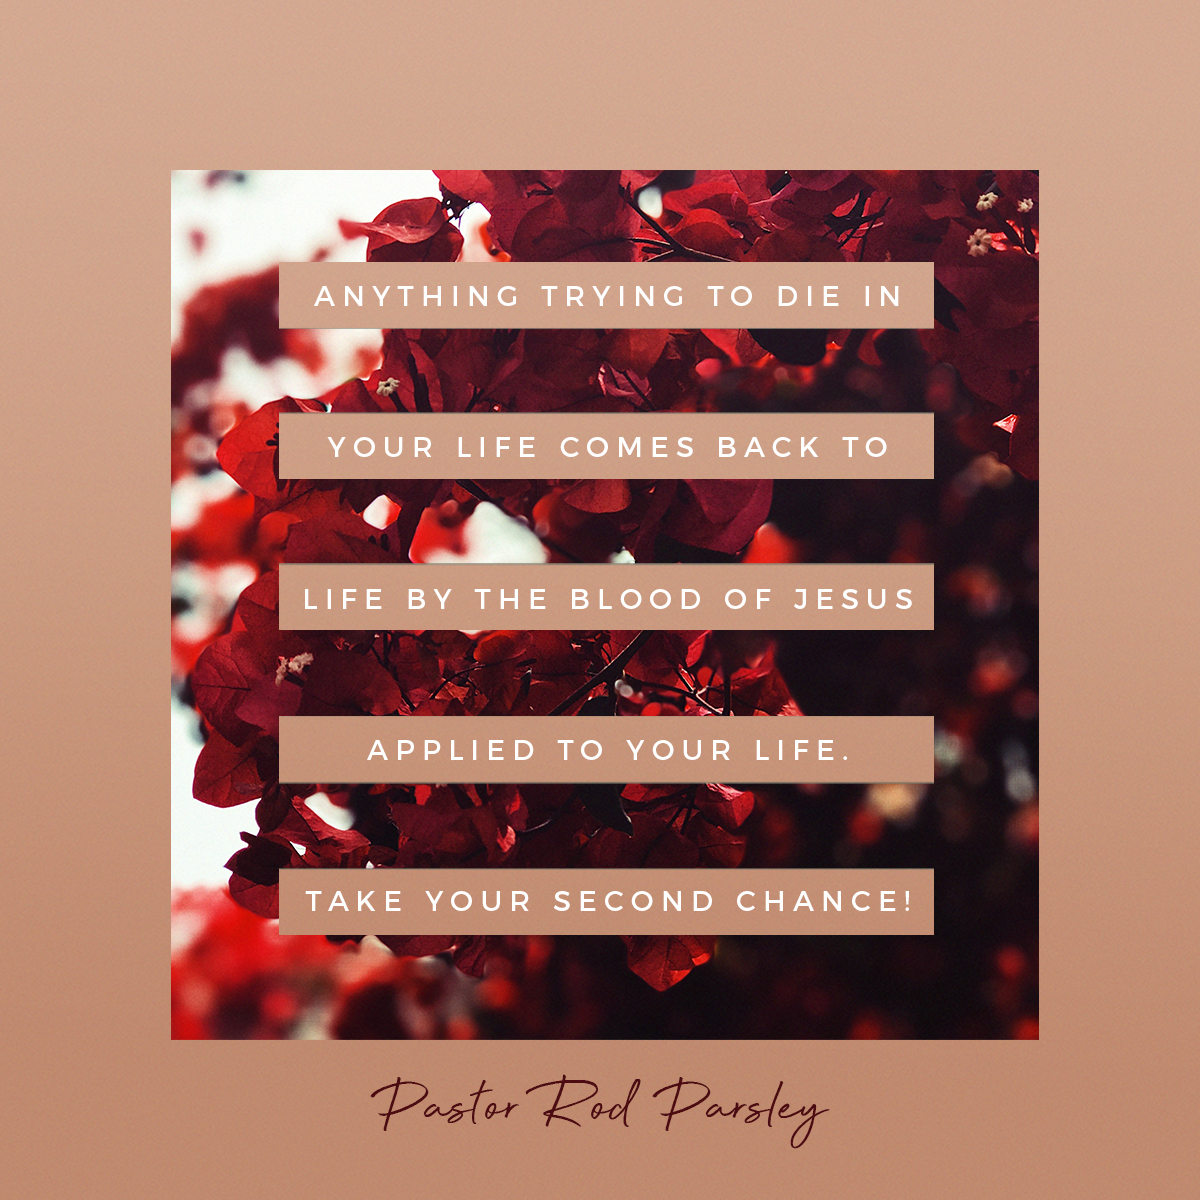 “Anything trying to die in your life comes back to life by the blood of Jesus applied to your life.  Take your second chance!” – Mrs. Joni Parsley